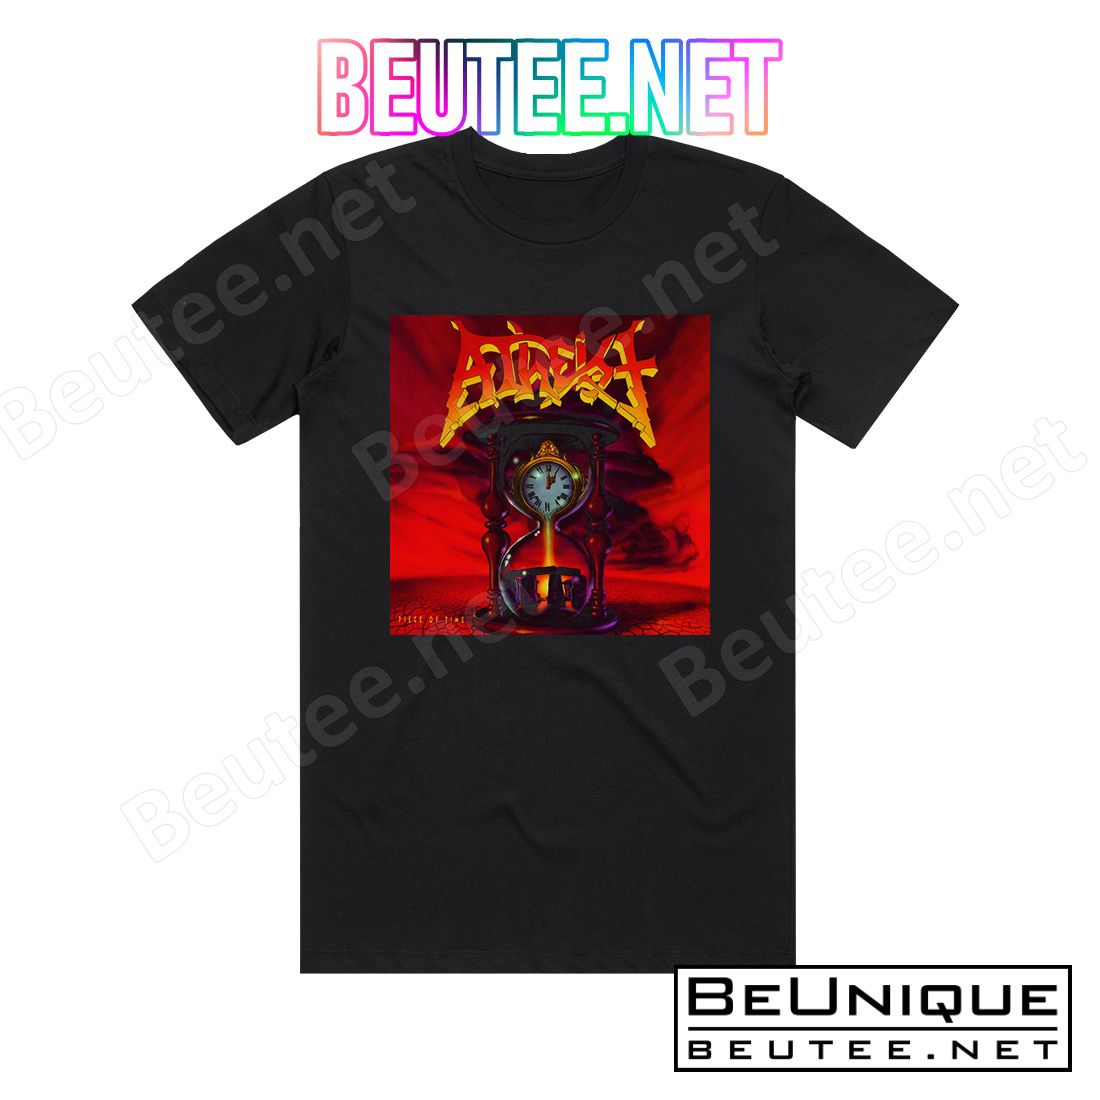 Atheist Piece Of Time 2 Album Cover T-Shirt